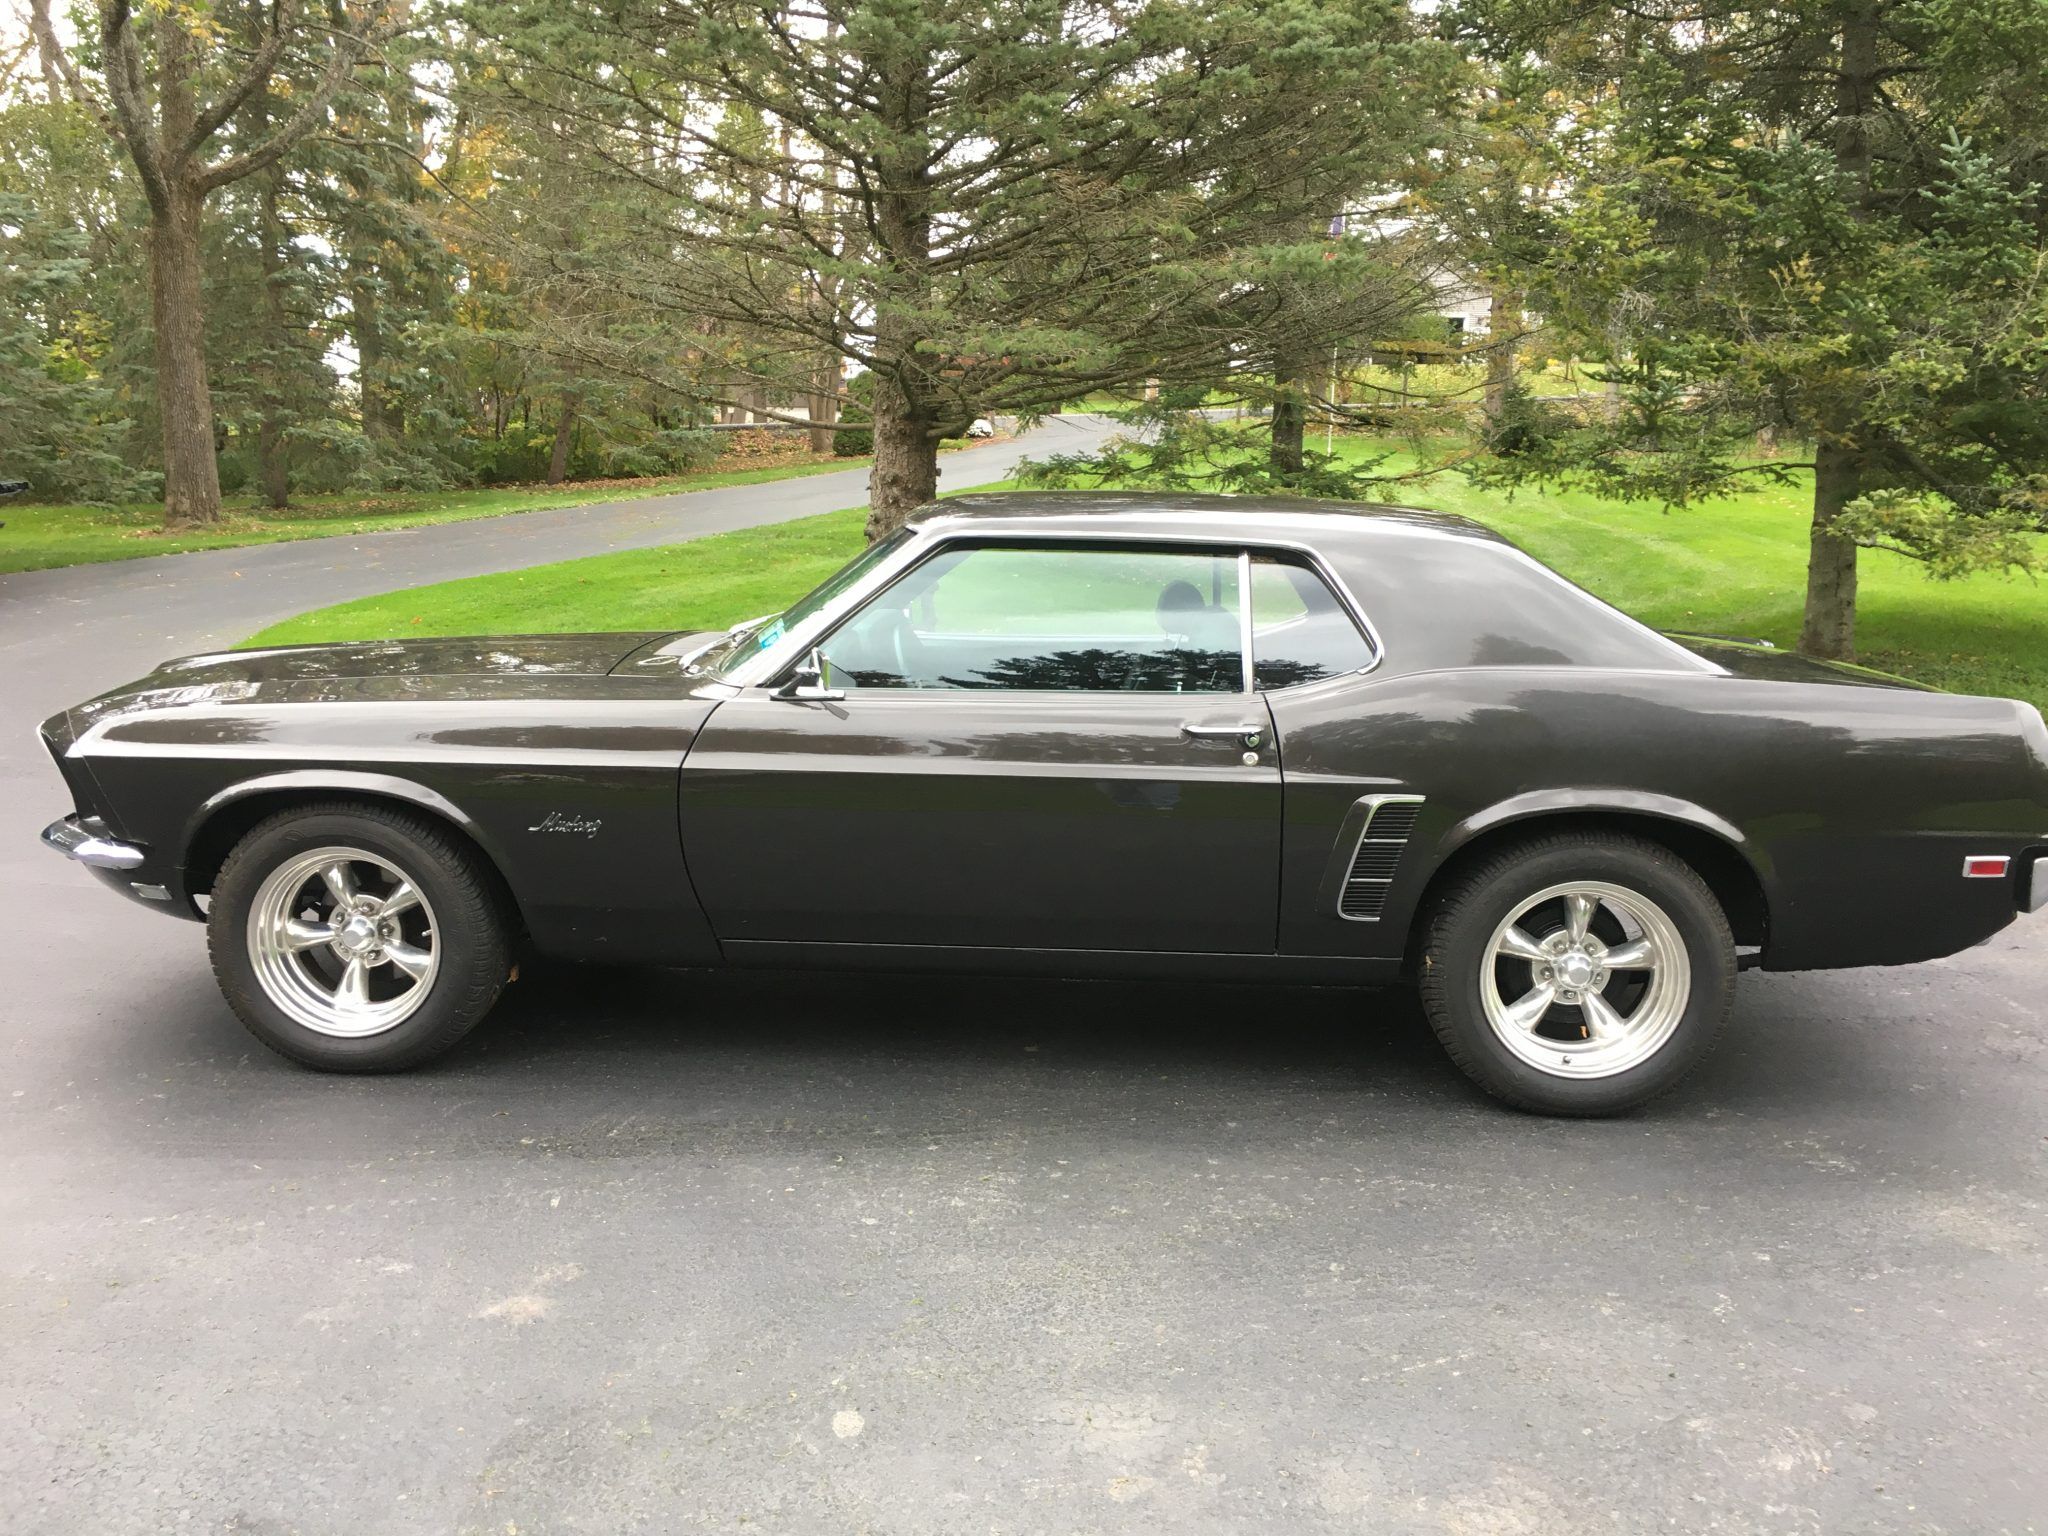 1965-1973 Ford Mustang (First Generation)